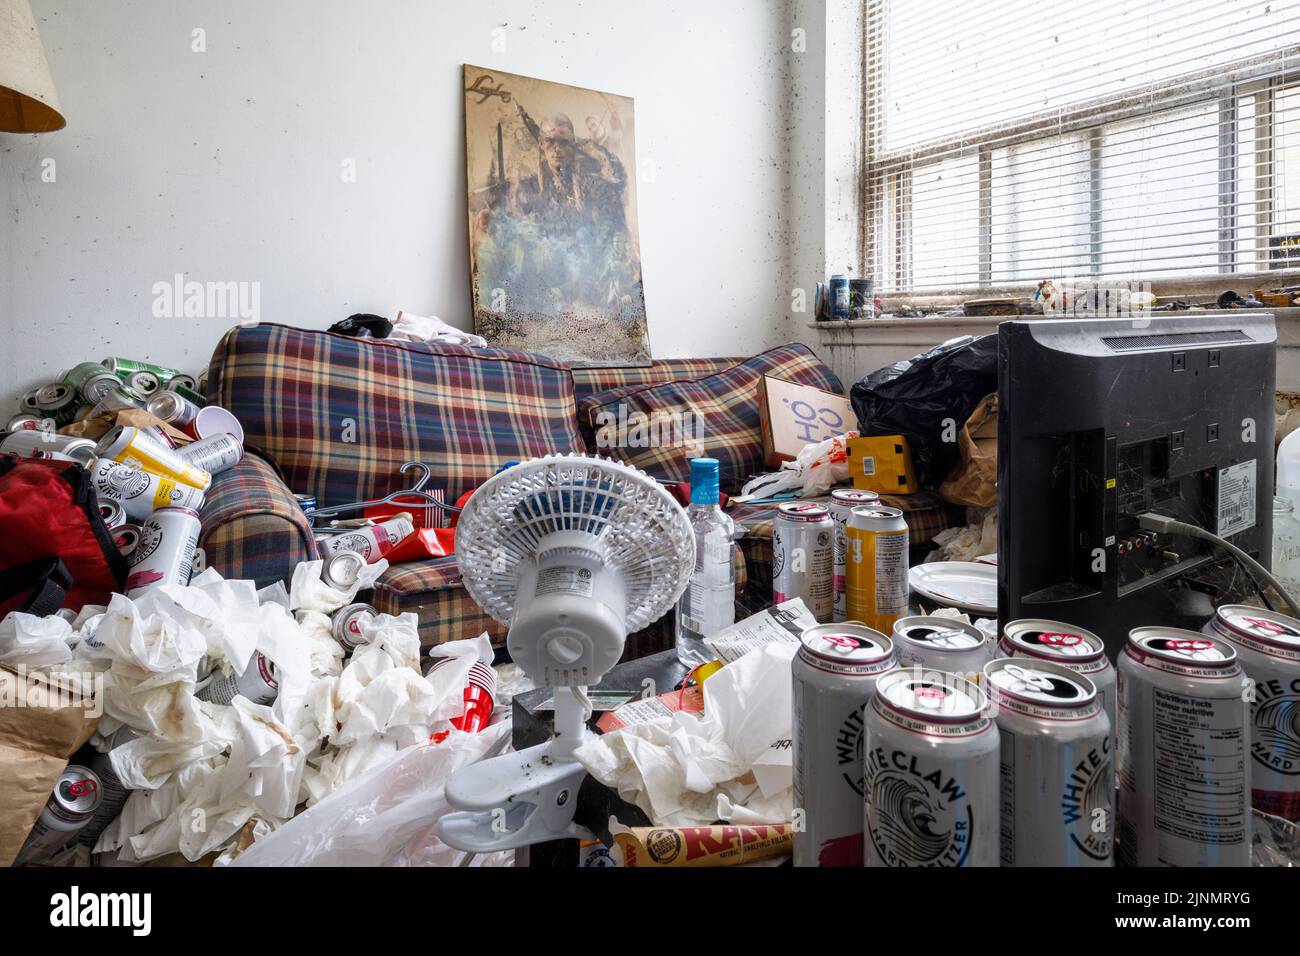 A filthy apartment living room with lots of clutter inside a hoarder's apartment. This building has since been demolished Stock Photo